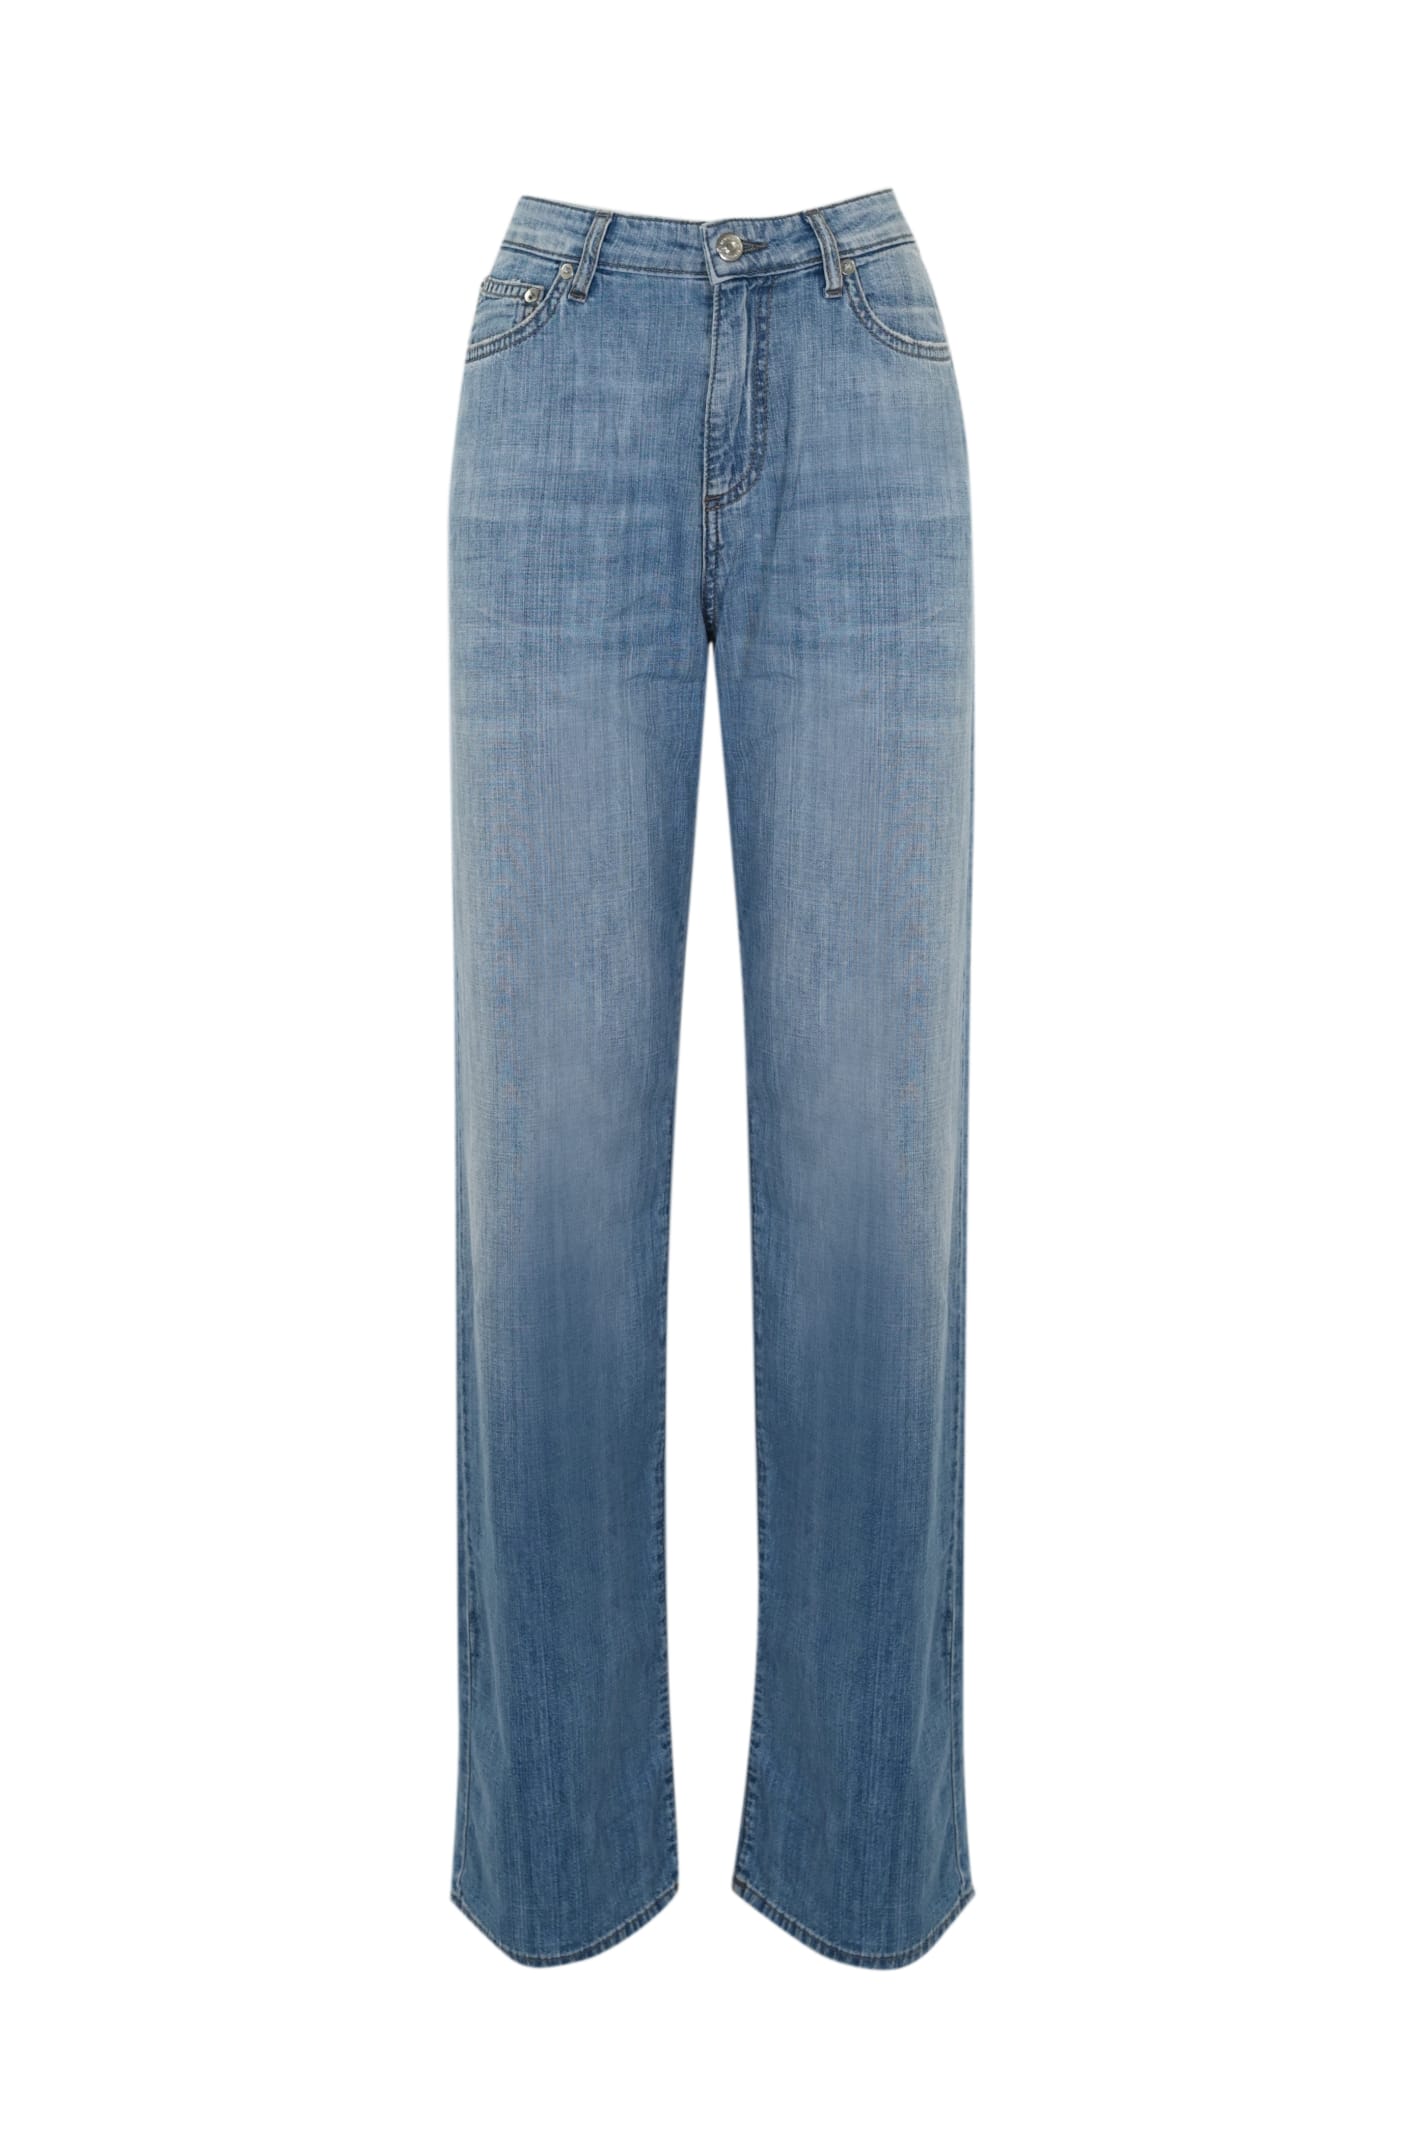 Roy Rogers Straight Cotton Jeans